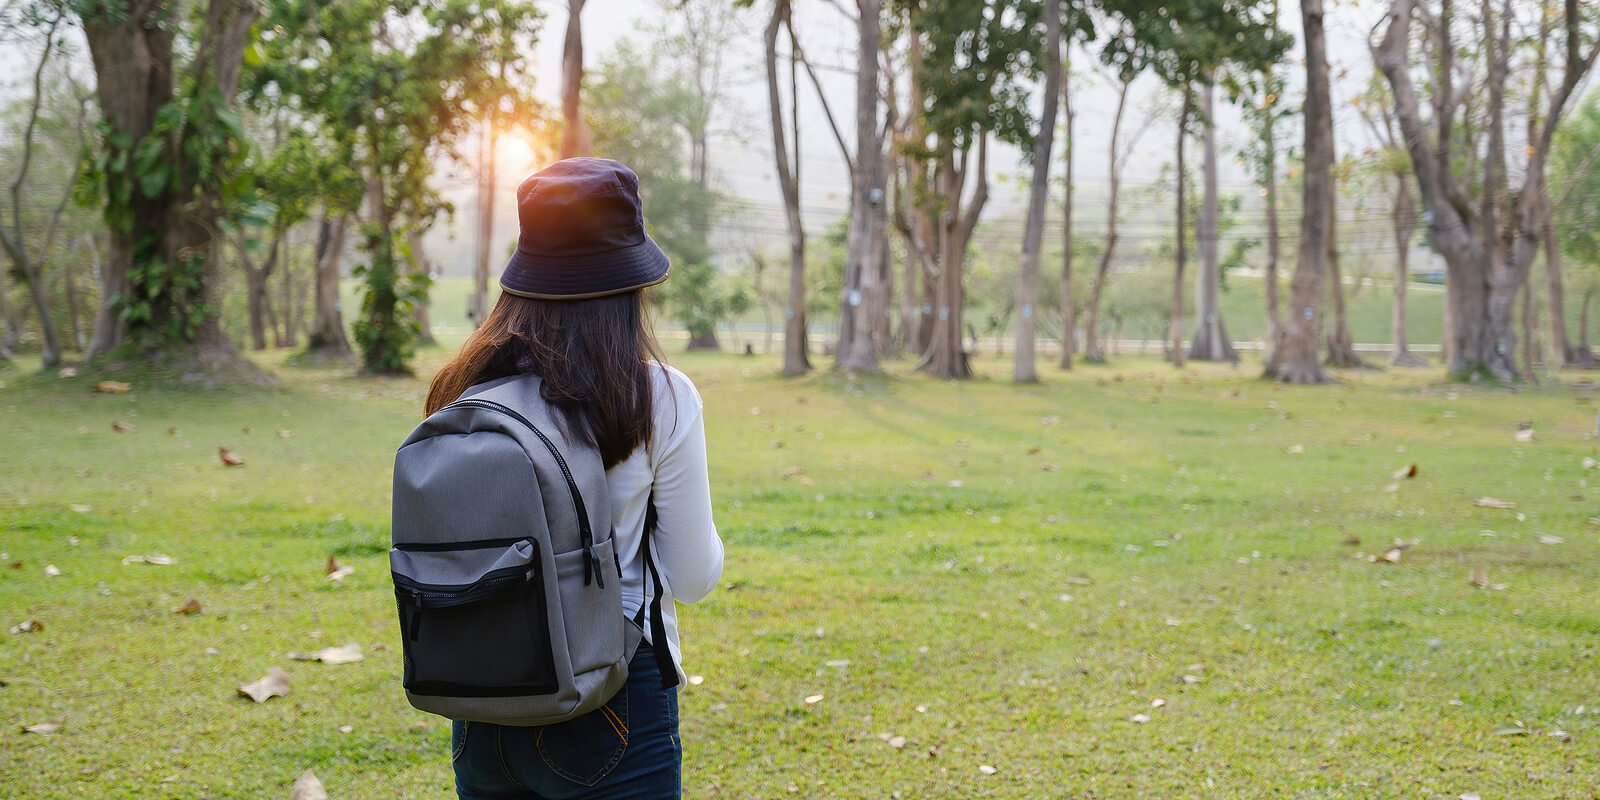 A woman stands near a bunch of trees in the grass in a park. Looking to get past your trauma through online trauma therapy in Austin, TX? An online trauma therapist can get you the help you need by reaching out.